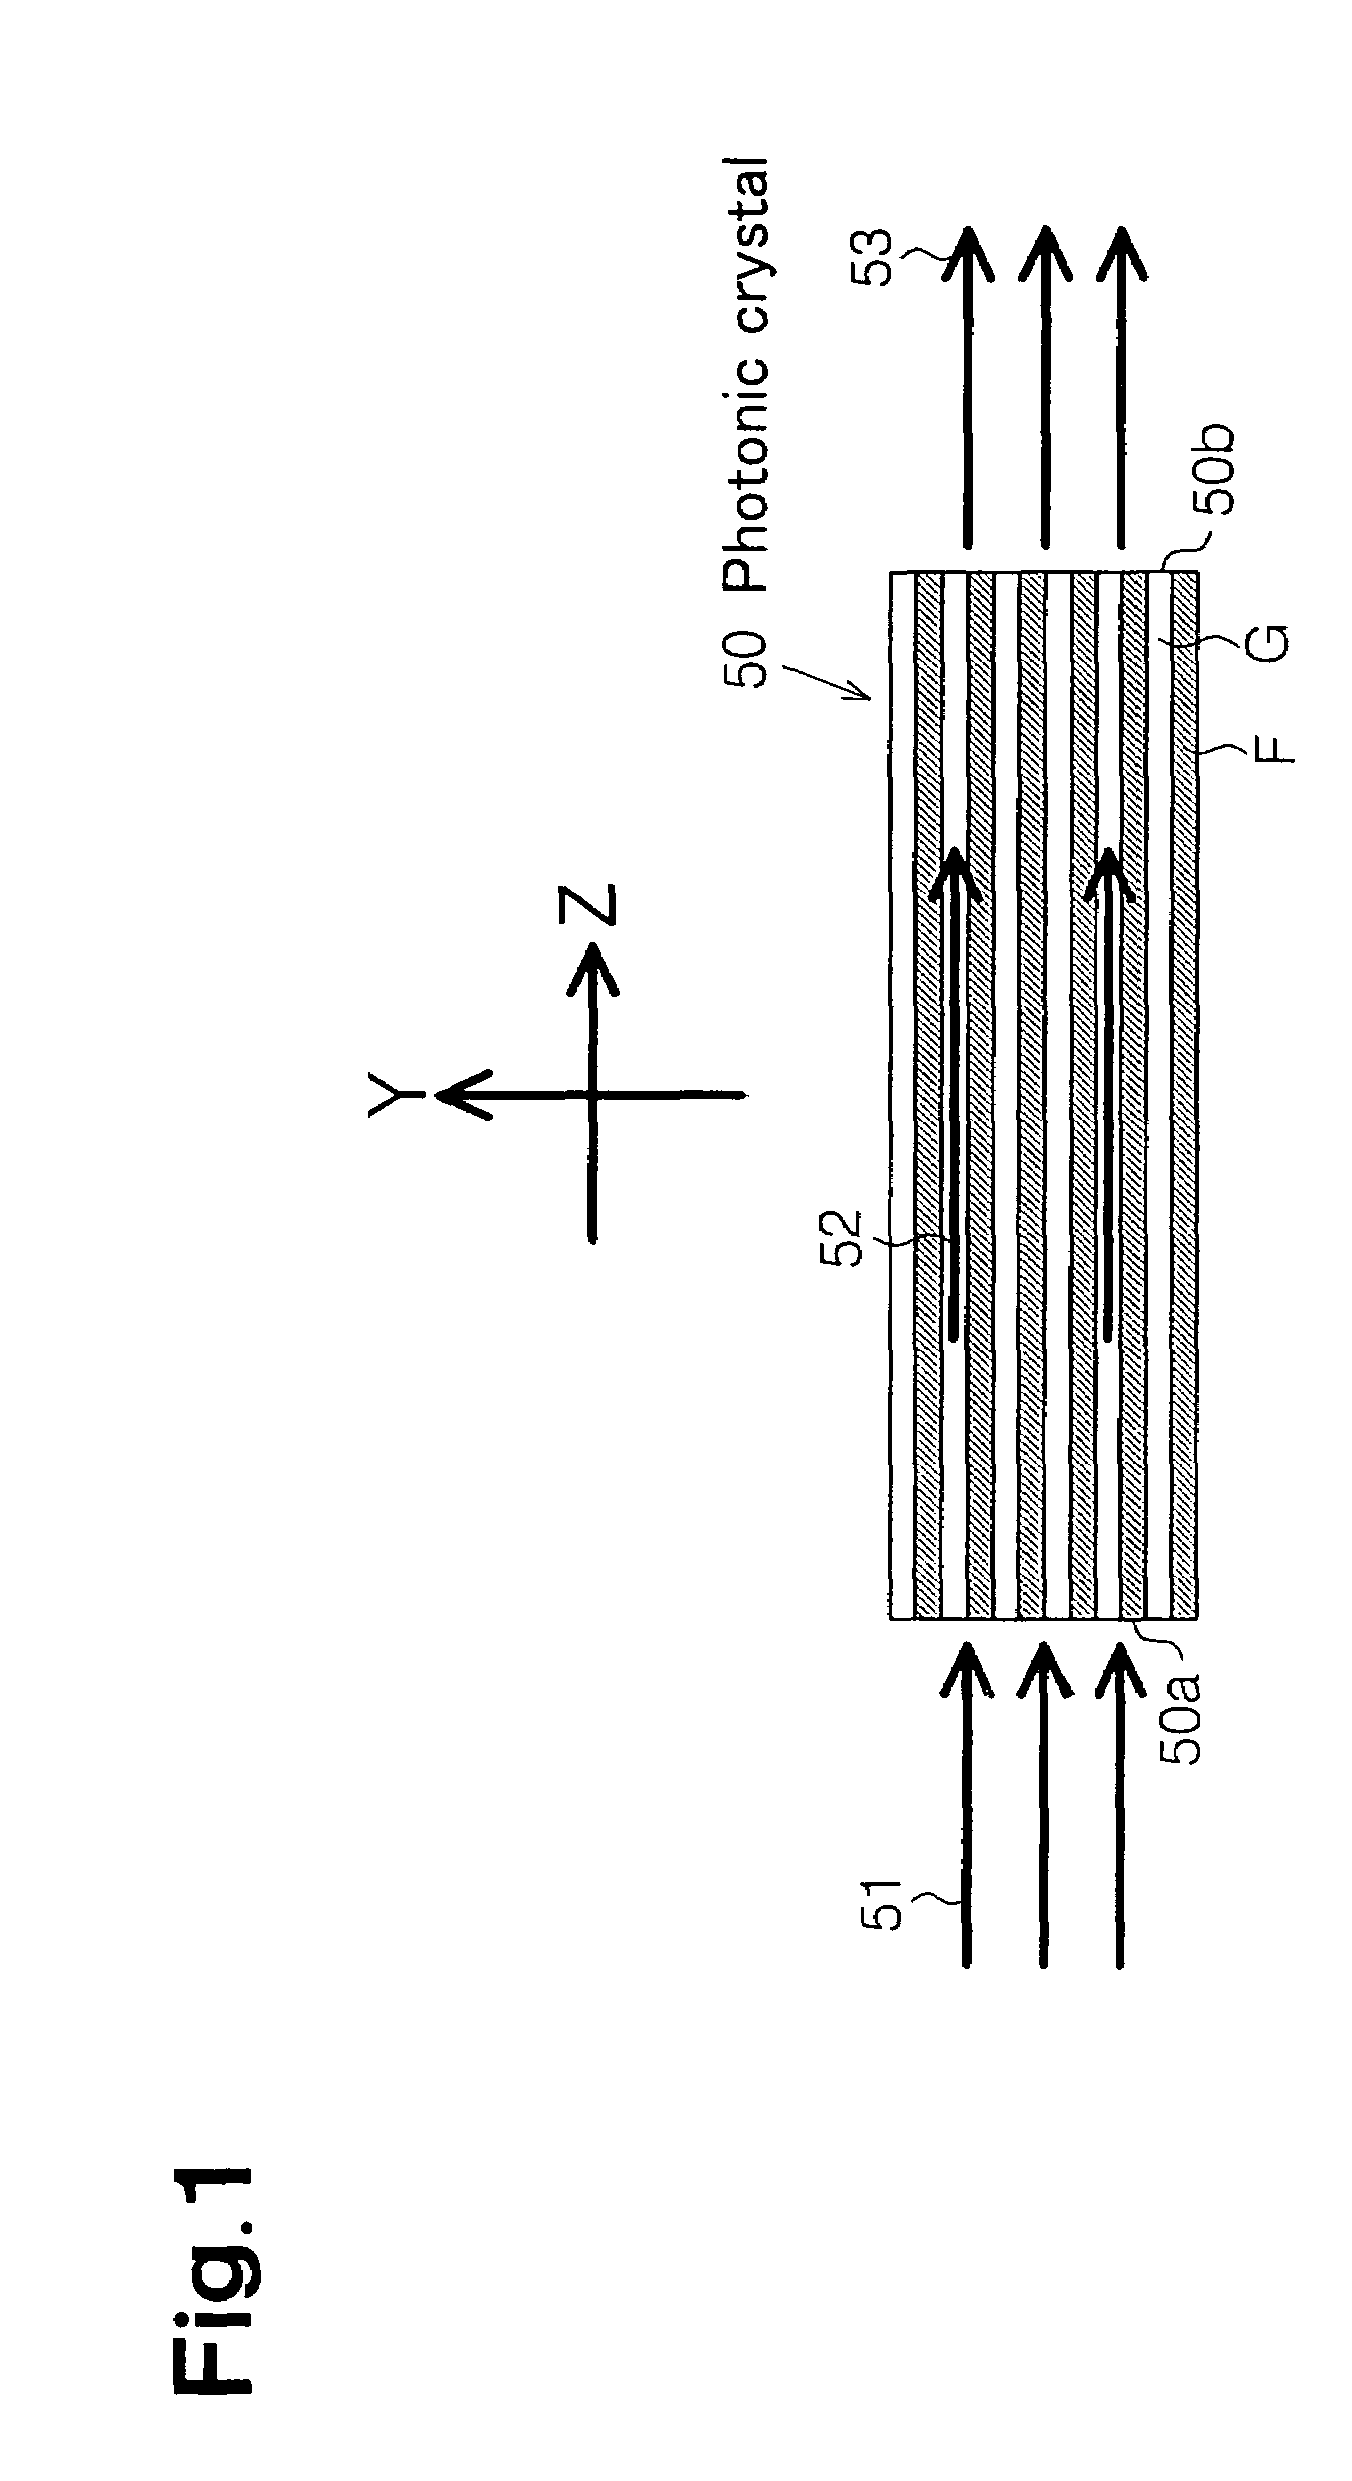 Photonic crystal waveguide, homogeneous medium waveguide, and optical device